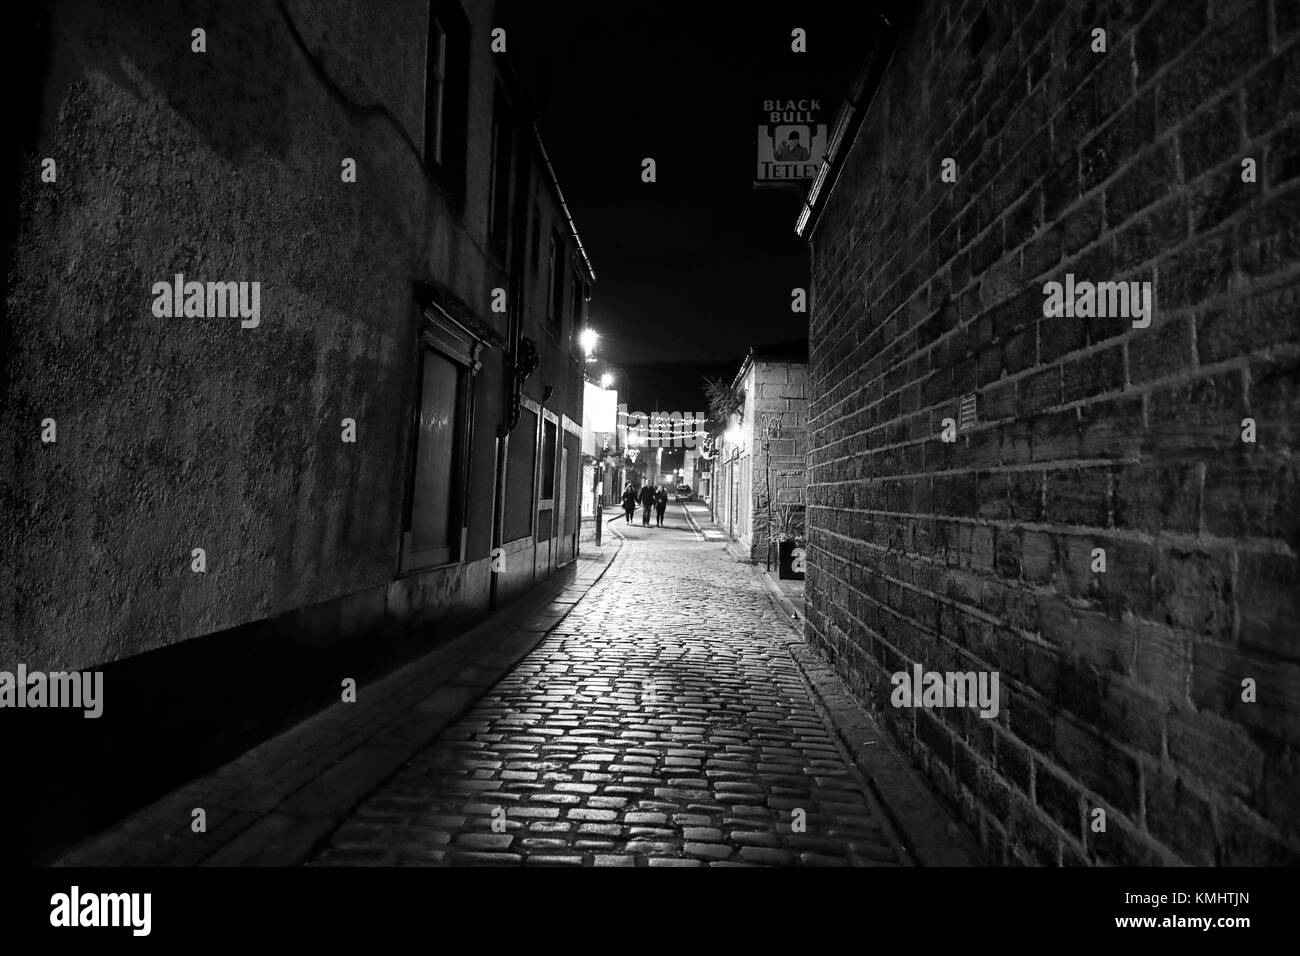 Illuminated cobbles of Black Bull yard and Newmarket Otley, a night scene showing the Christmas lights along Newmarket Stock Photo